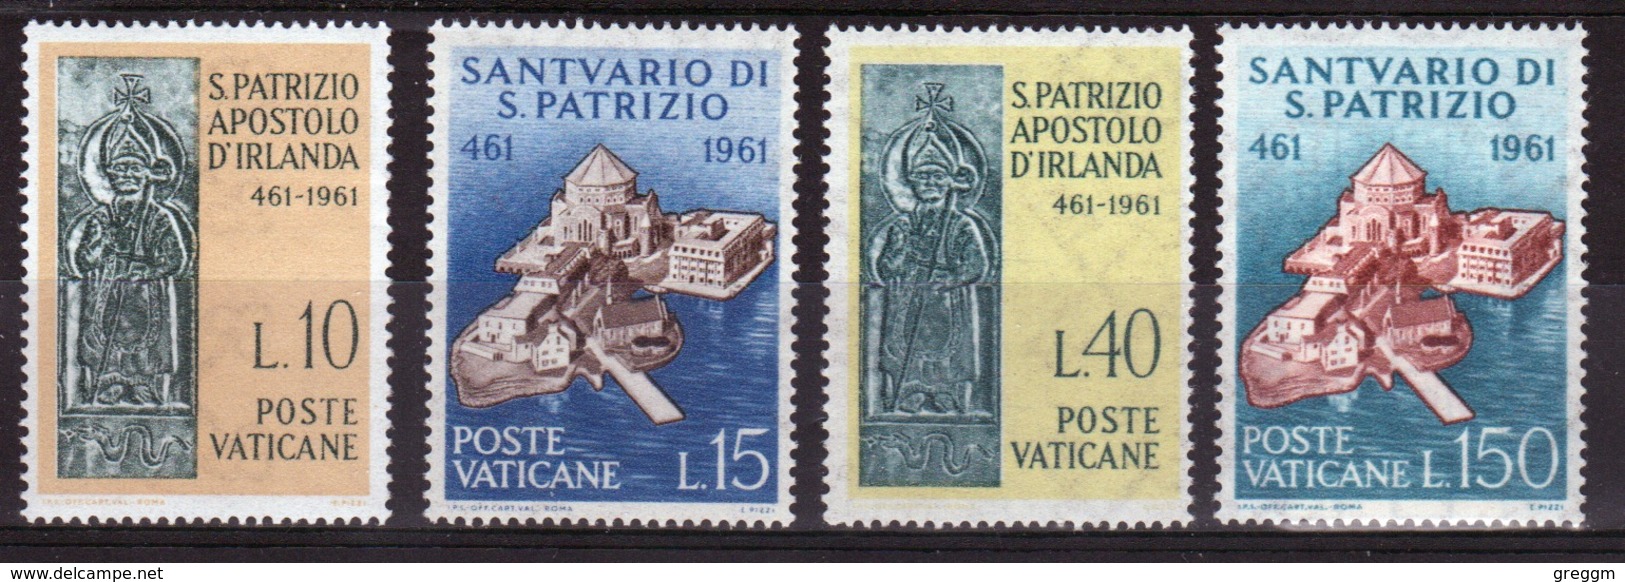 Vatican 1961 Complete Set Of Stamps Celebrating The 15th Death Anniversary Of St Patrick. - Unused Stamps